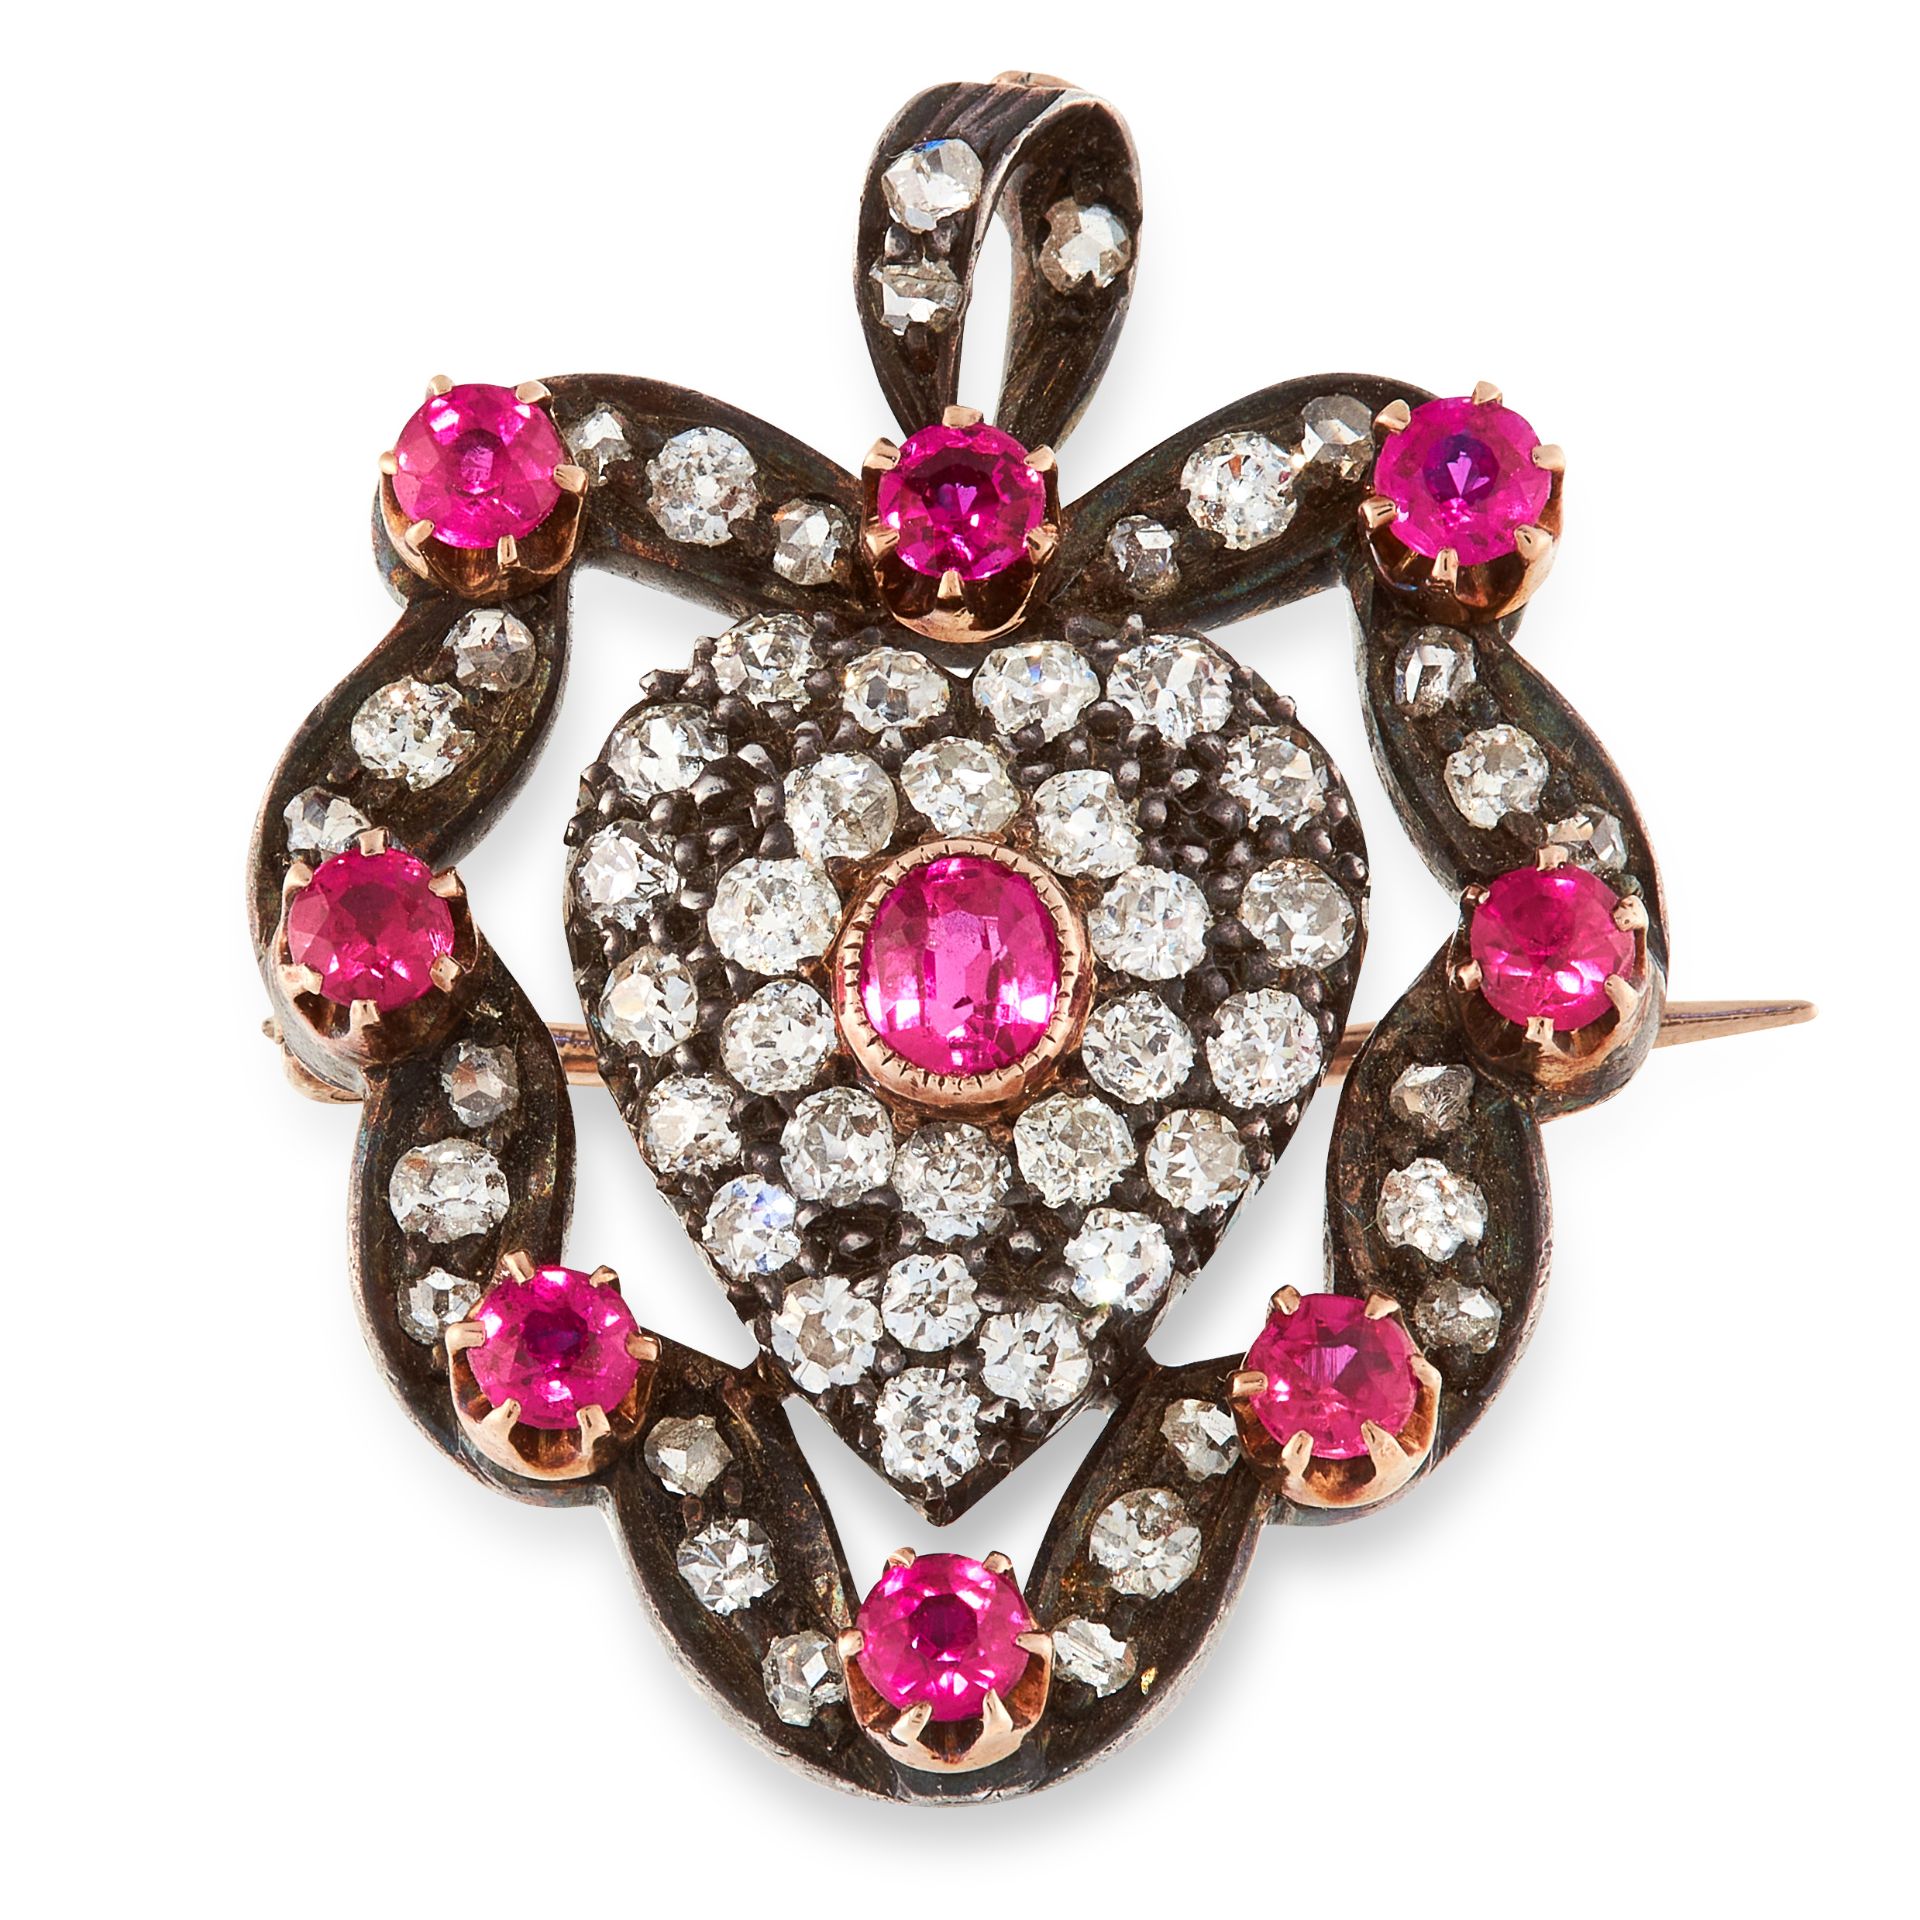 AN ANTIQUE RUBY AND DIAMOND SWEETHEART PENDANT / BROOCH in yellow gold and silver, designed as a